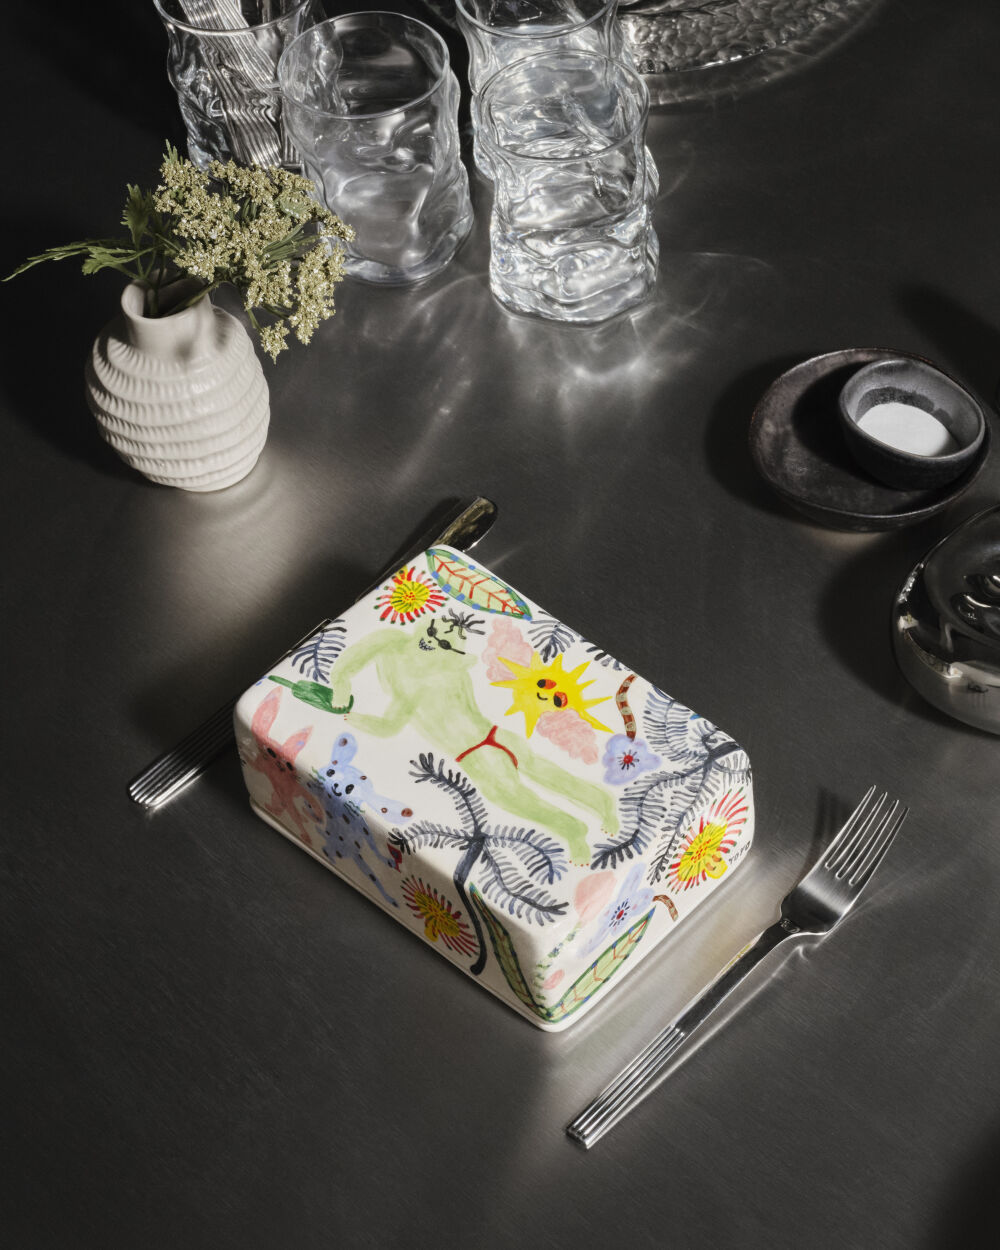 Handpainted lunch box by the upcoming artist Yoyo Nasty for the app company Dreams